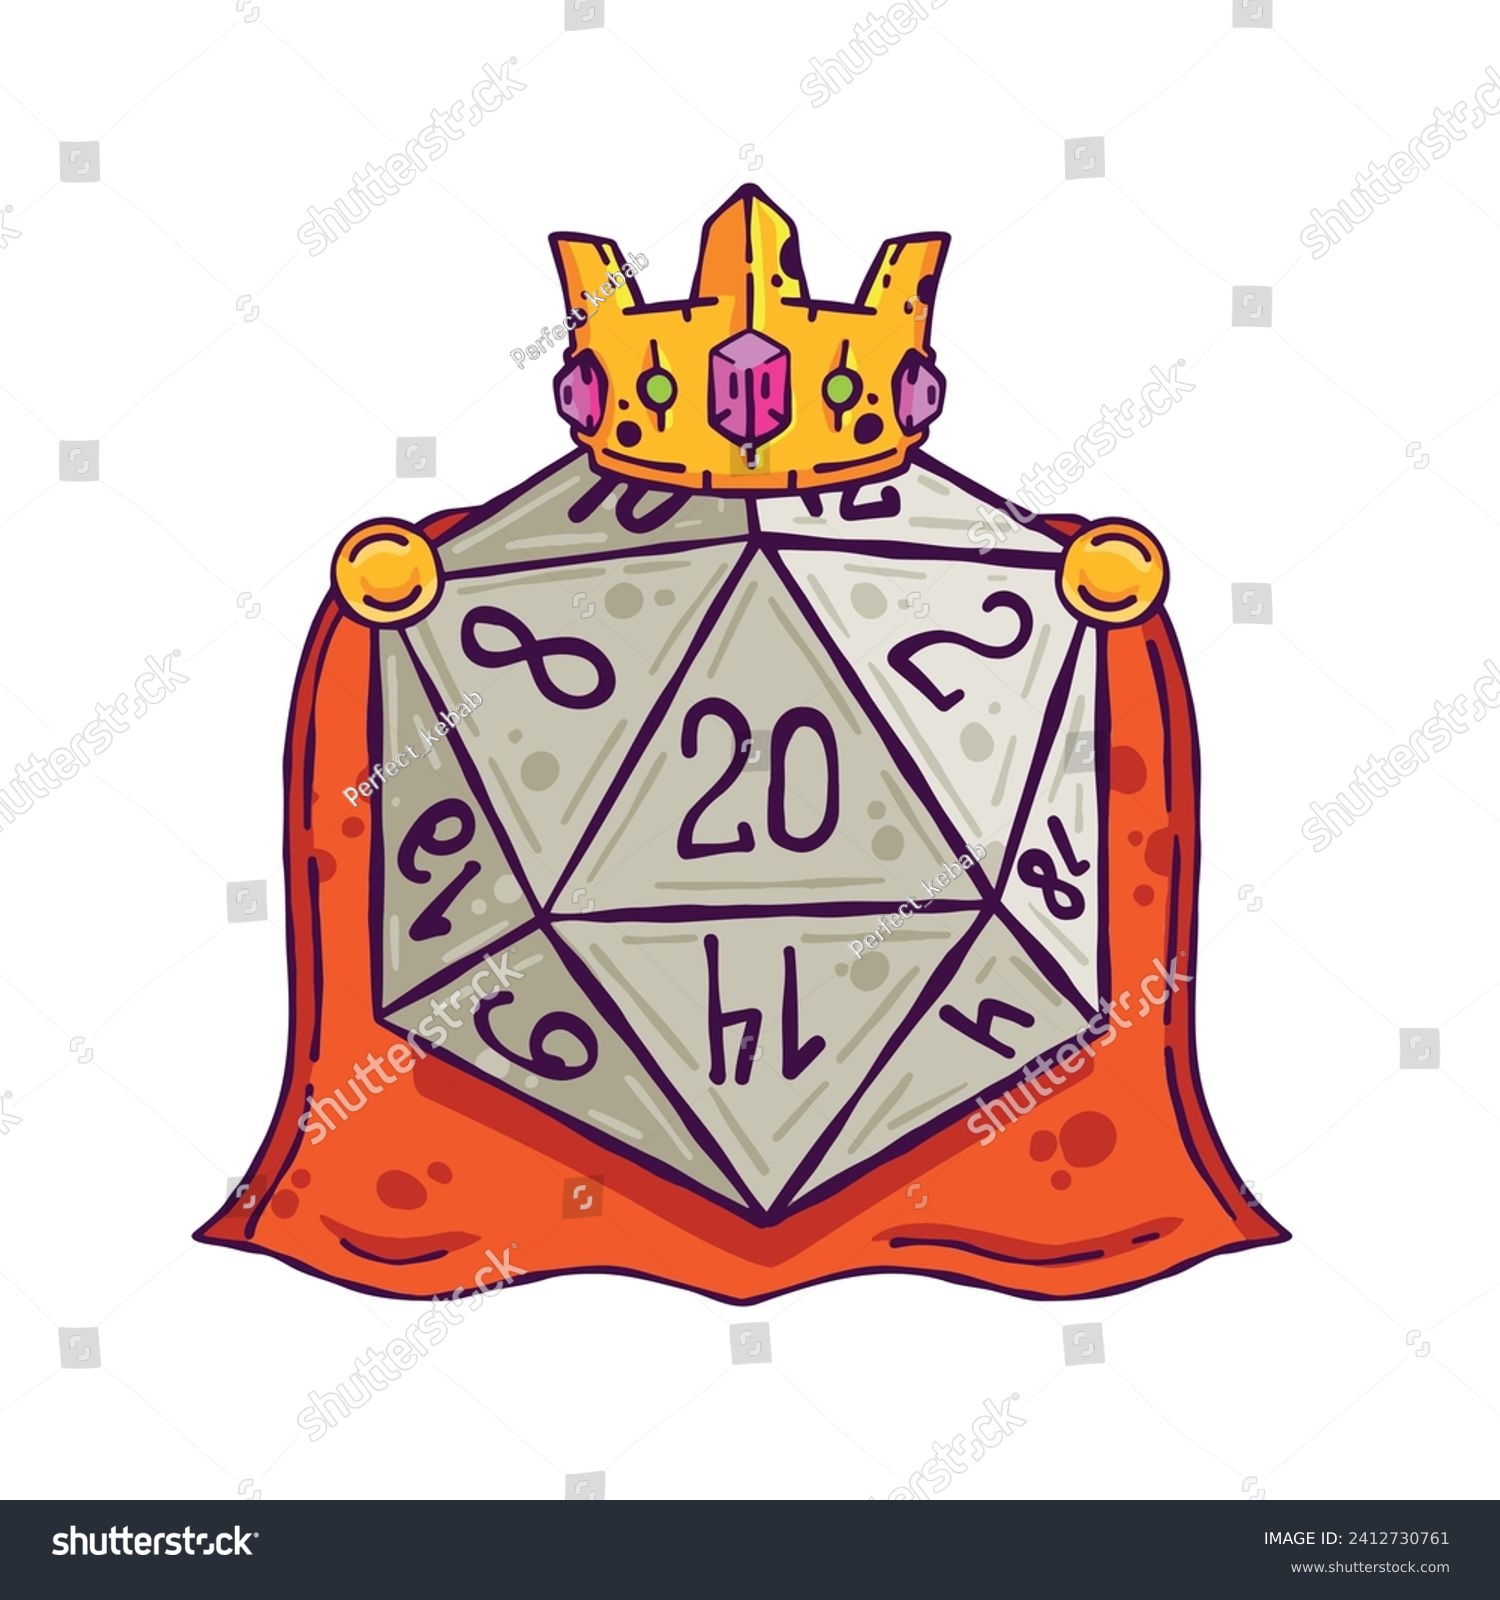 SVG of Dice d20. King character of board game with gold crown. Cartoon outline drawn illustration svg